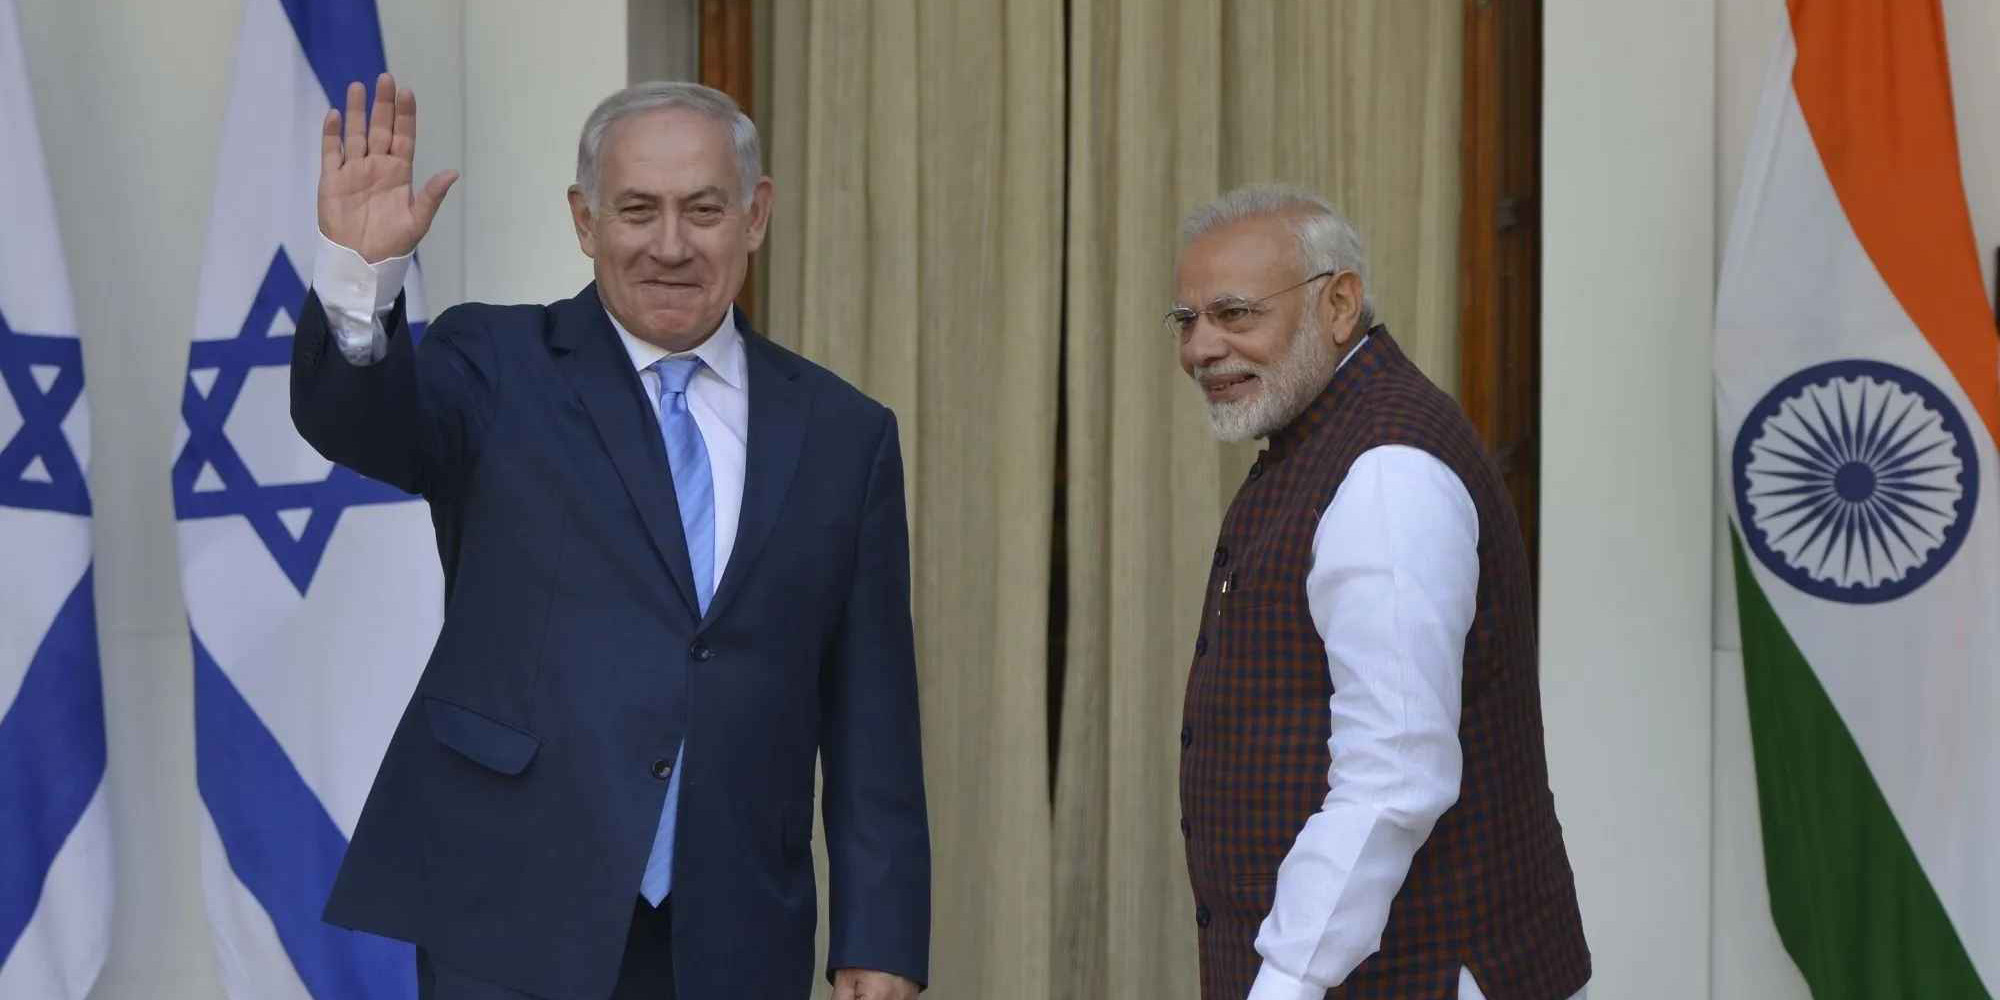 Consequences of Indian arms exports to Israel